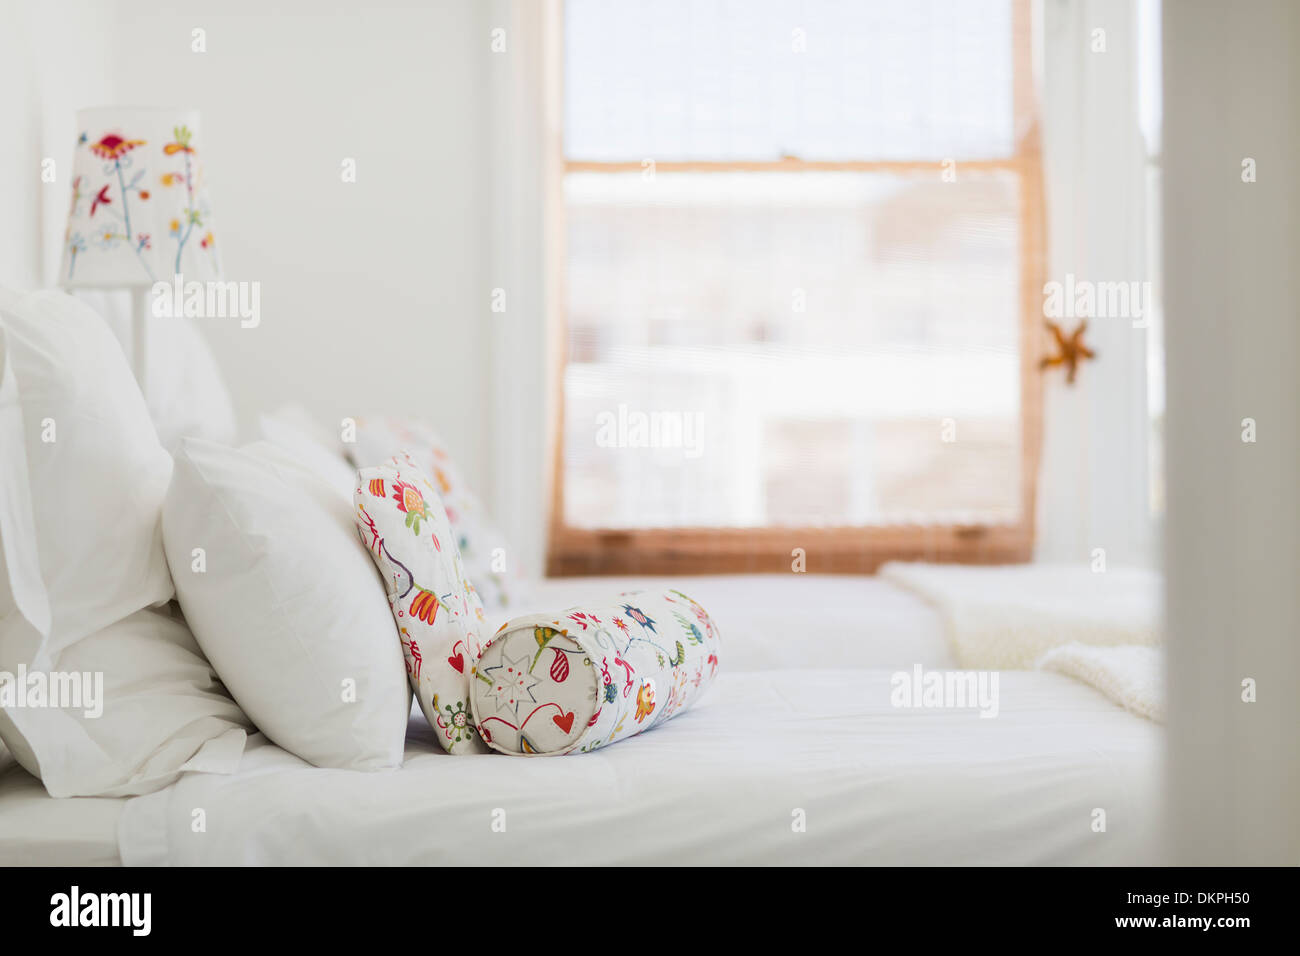 Large Bed White Furry Blanket Pillows Upholstered Panel Headboard Colorful  Stock Photo by ©anastasiagorova.gmail.com 314558246